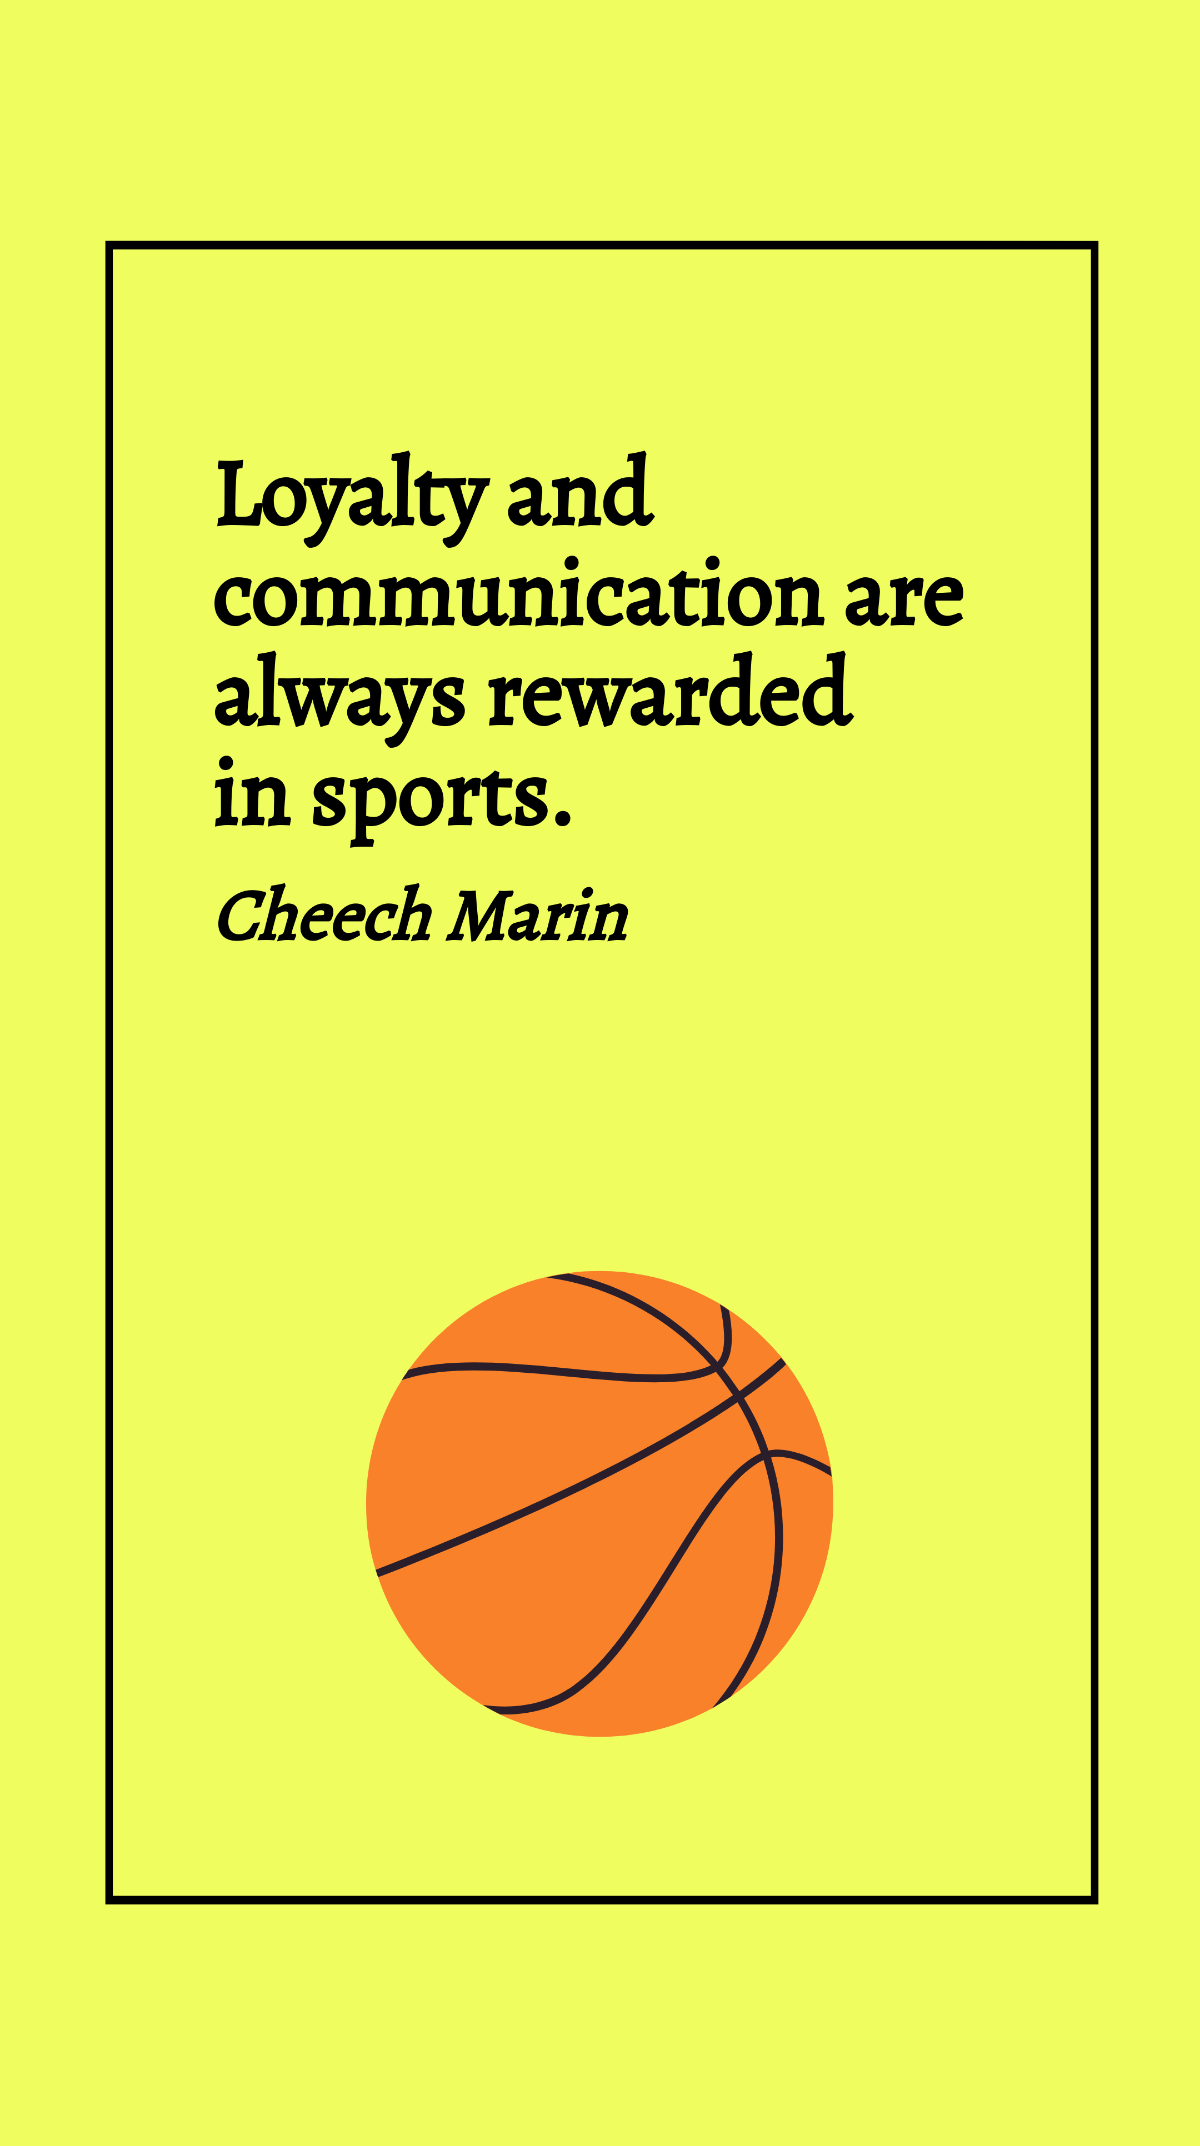 Cheech Marin - Loyalty and communication are always rewarded in sports.